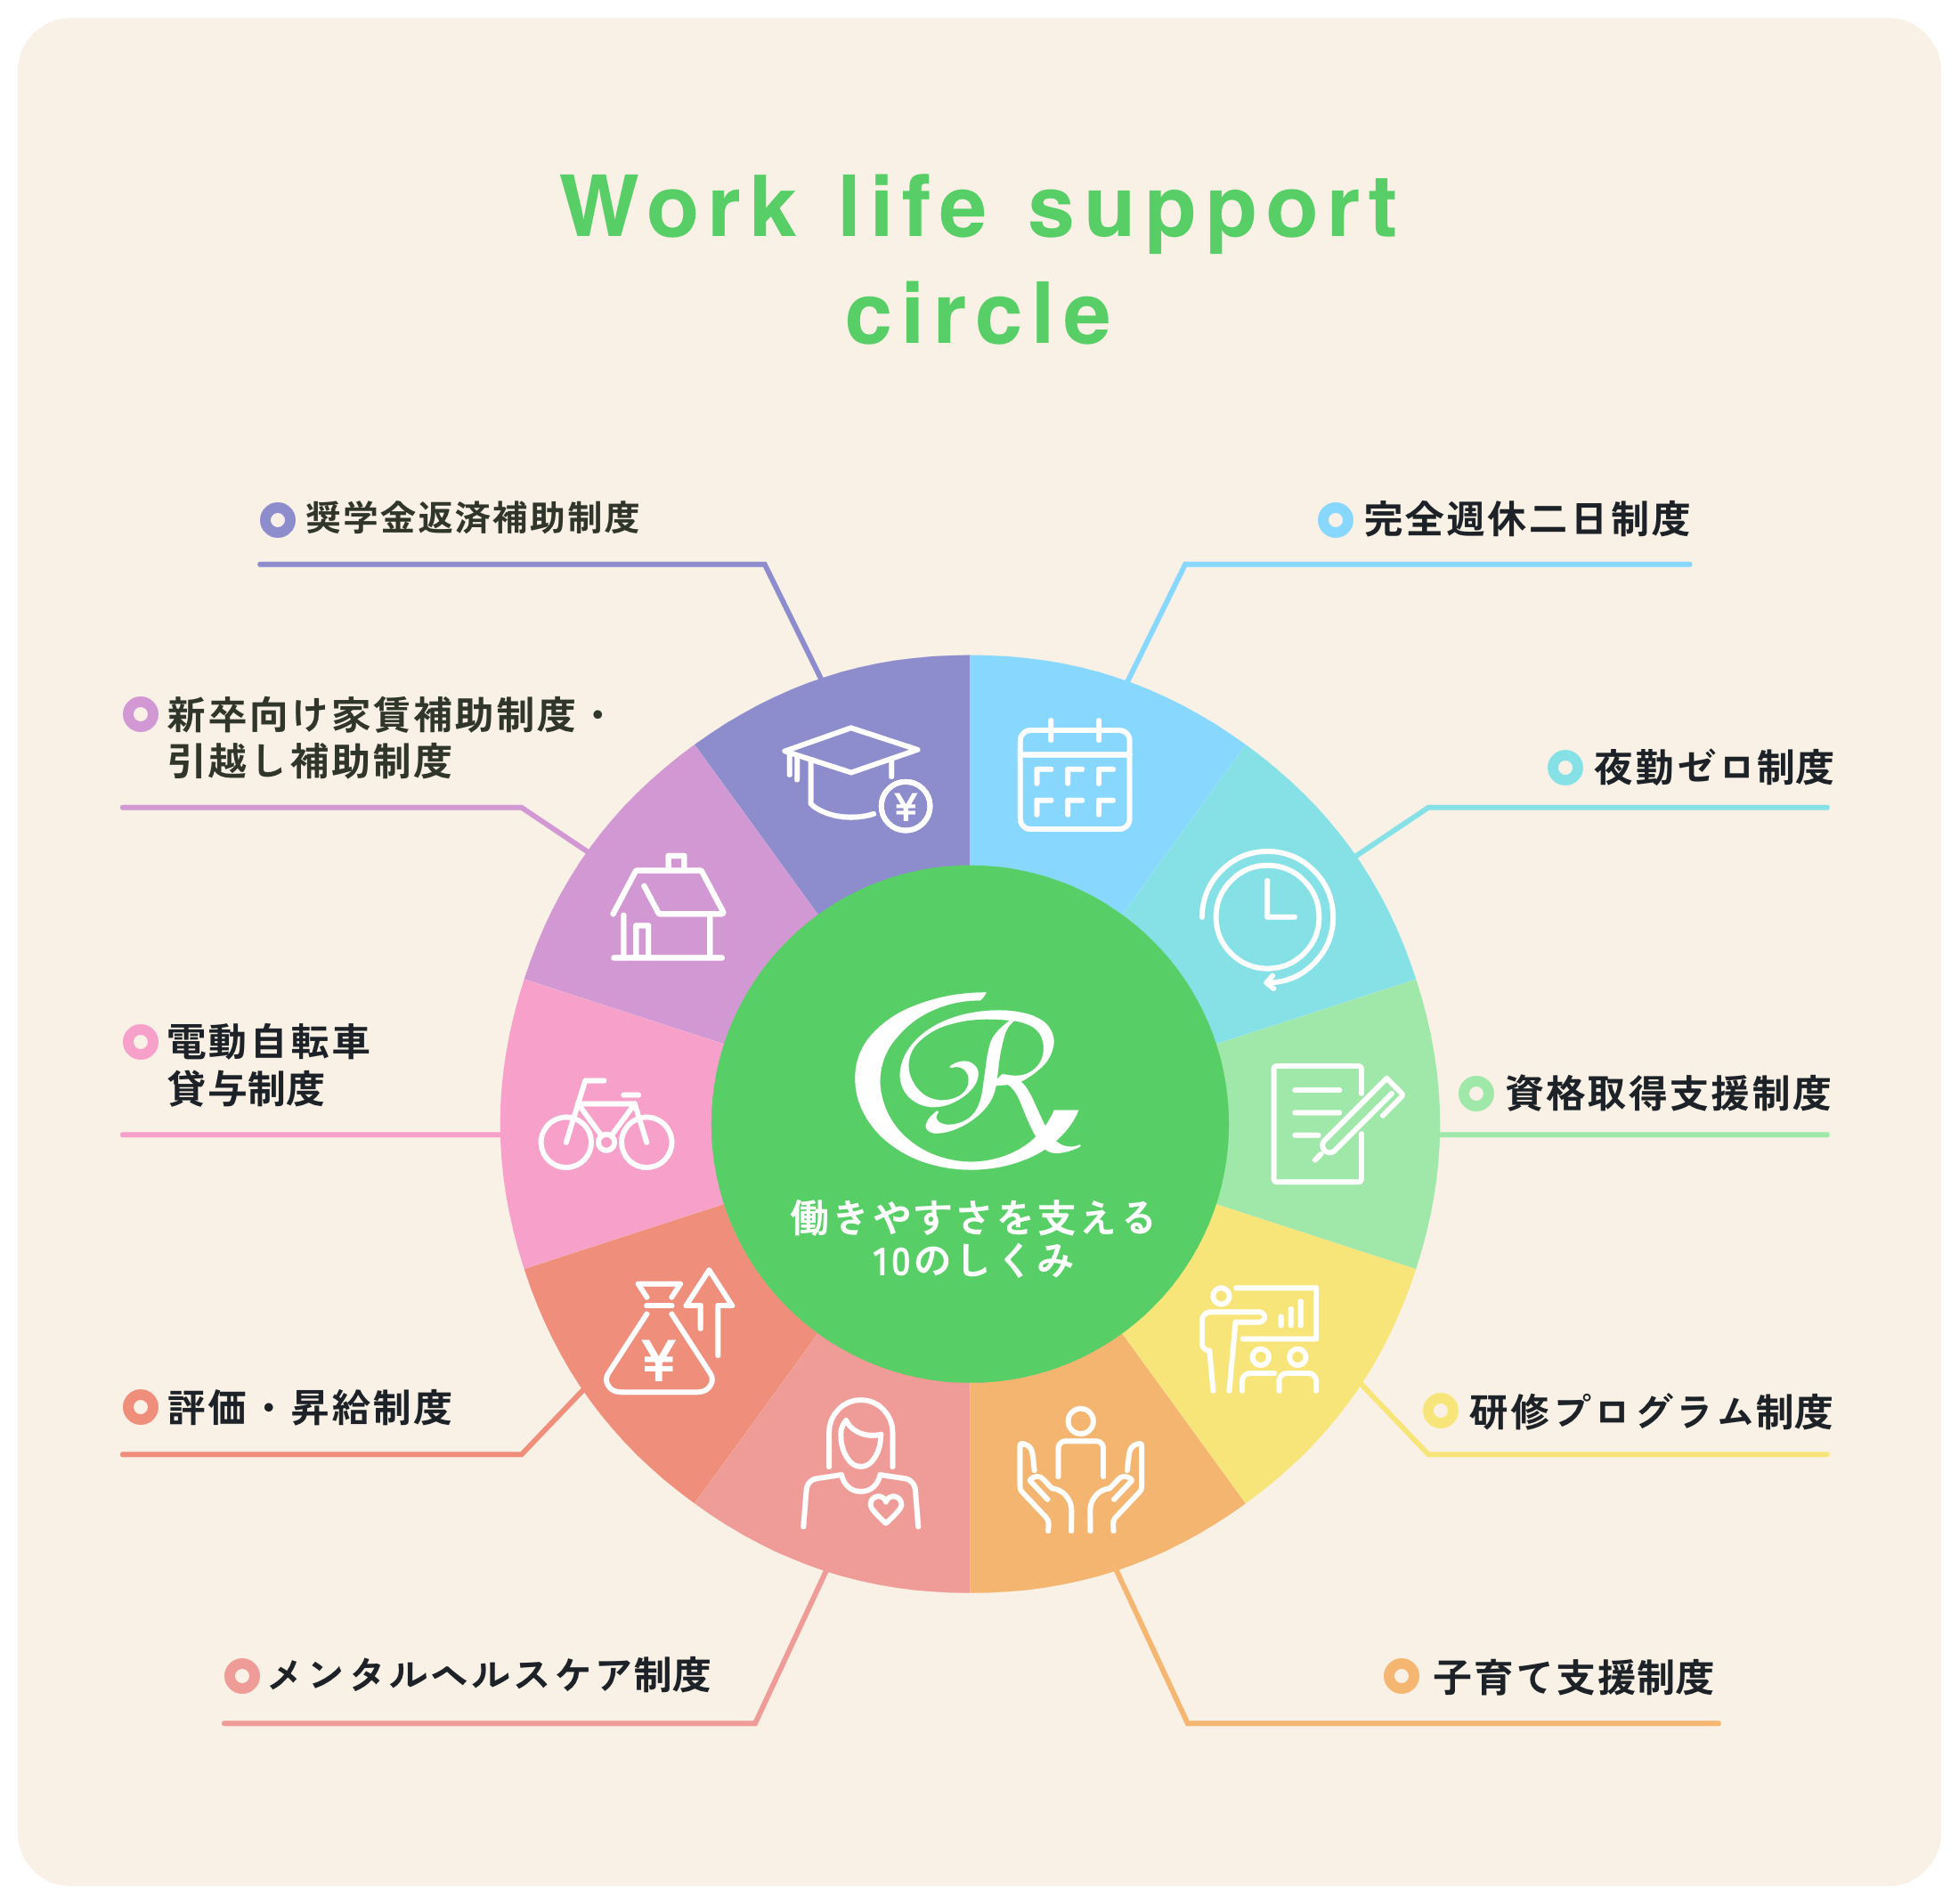 Work life support circle